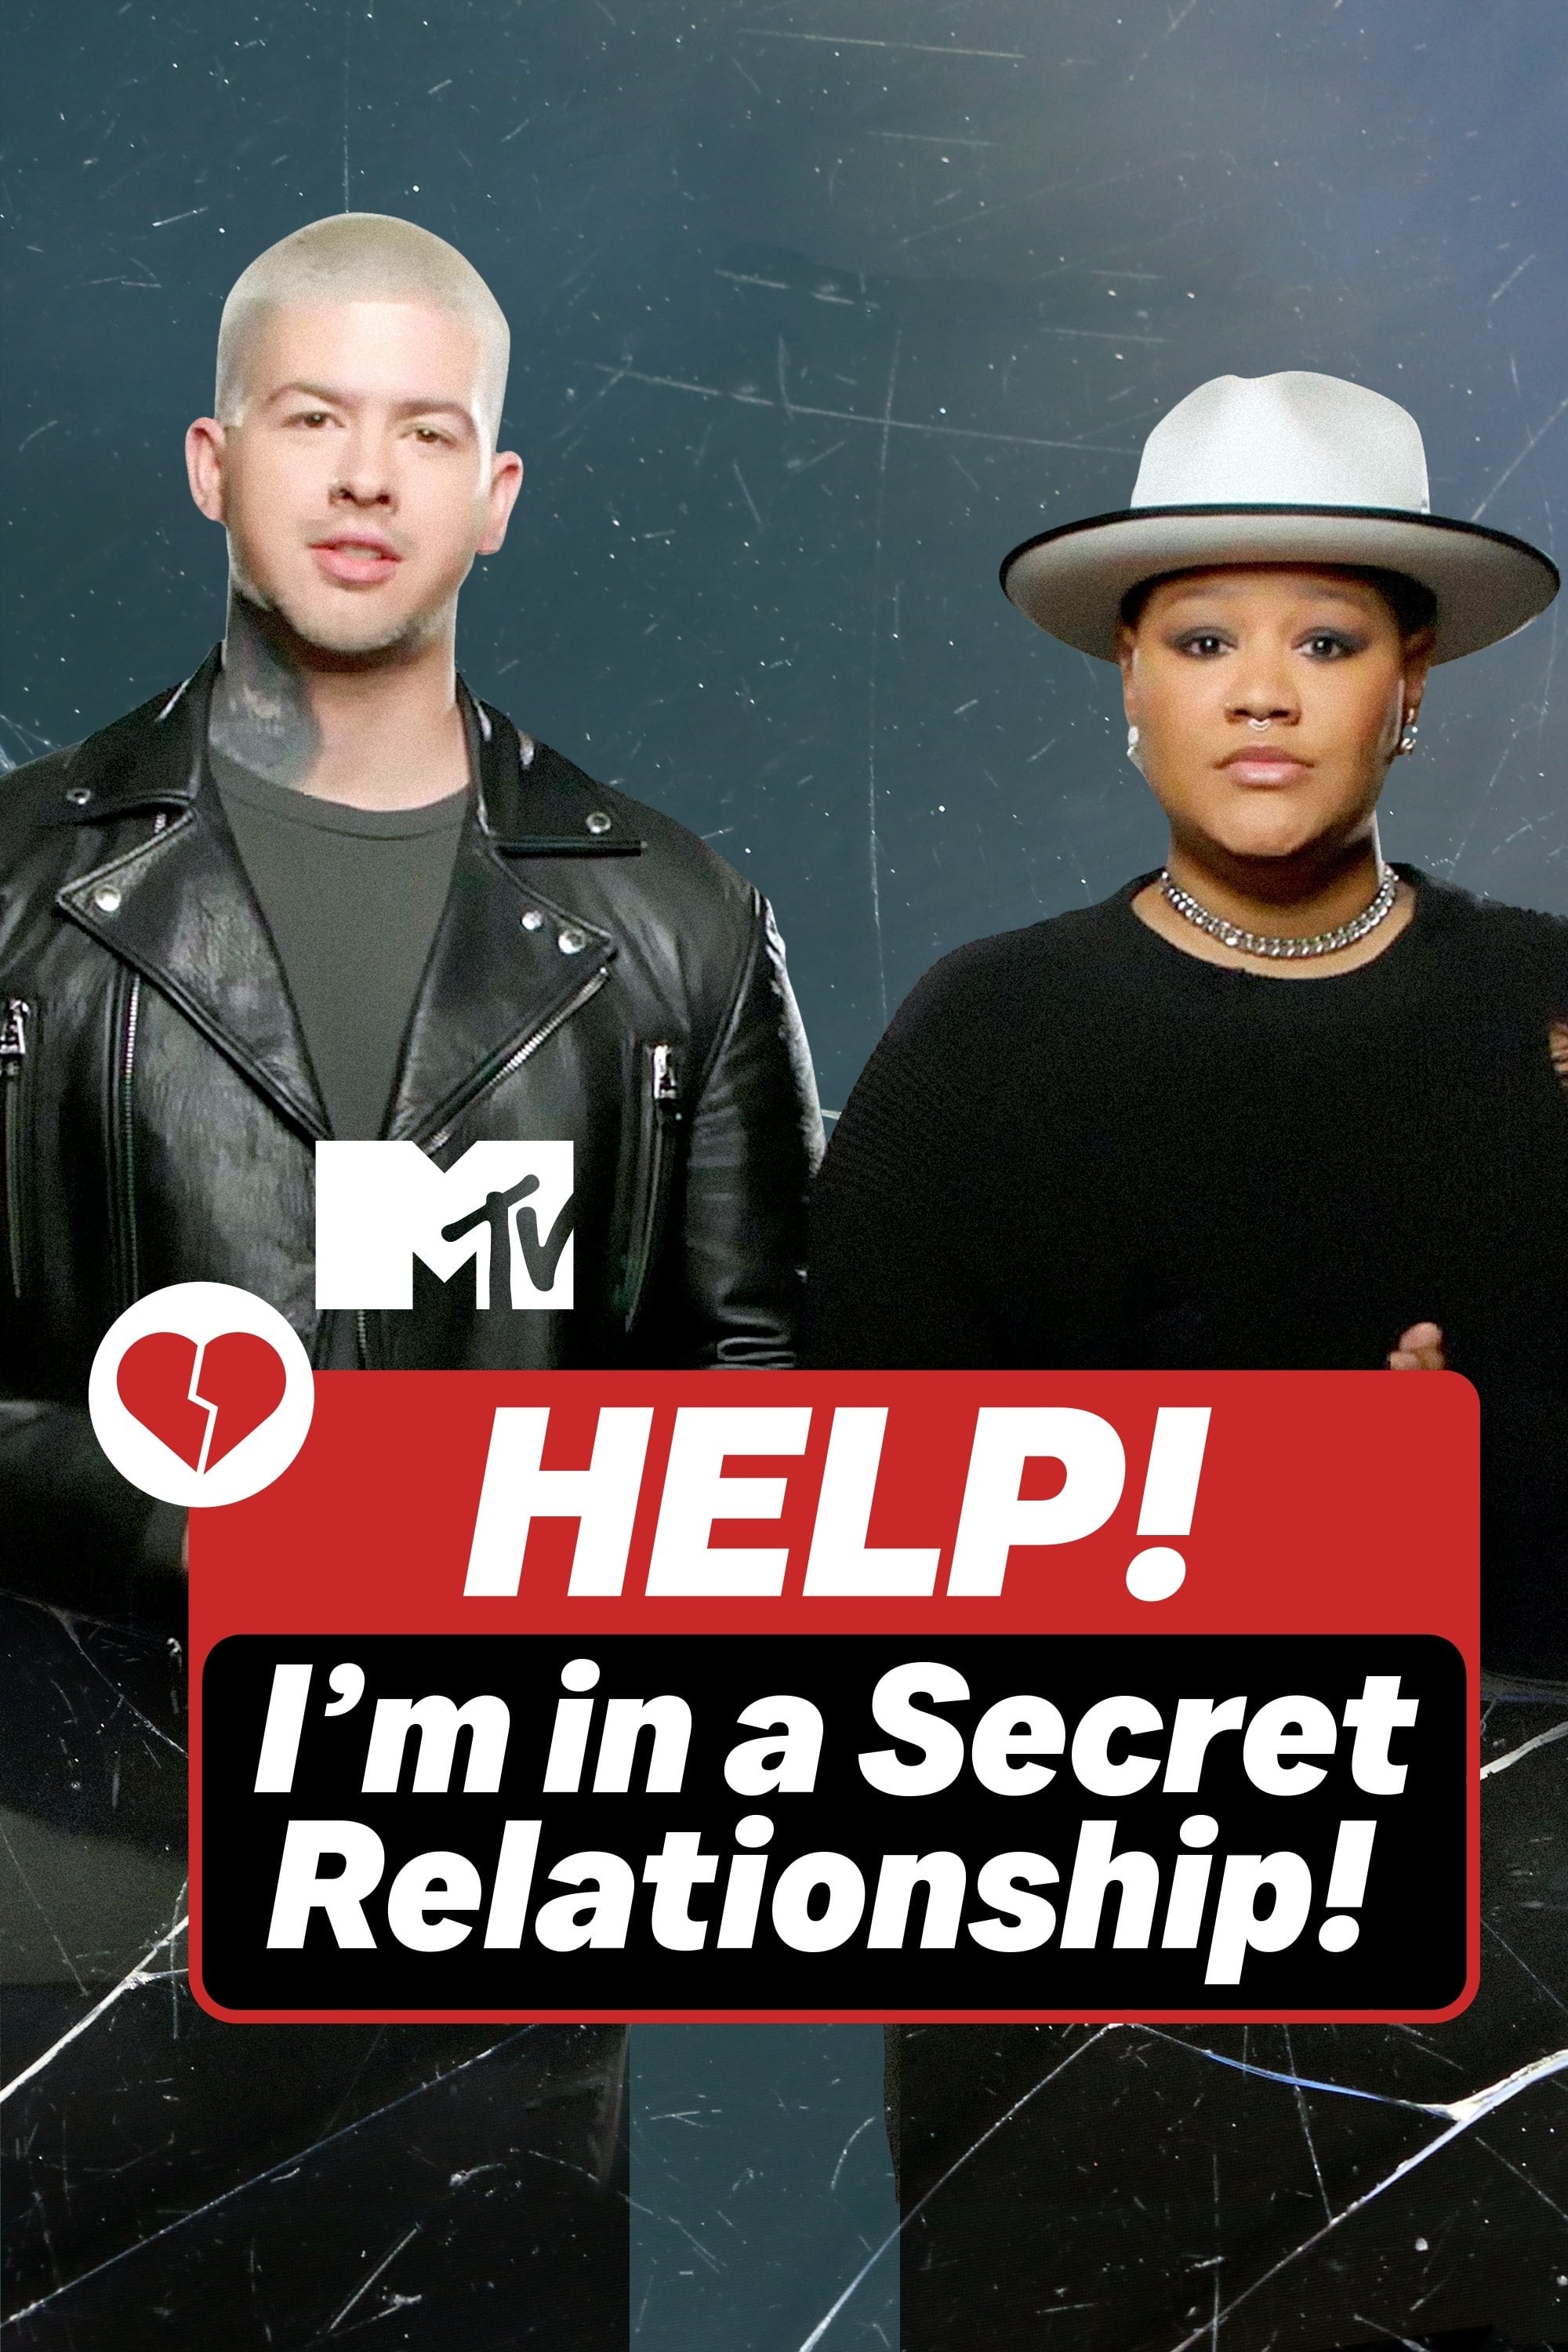 Help! I'm in a Secret Relationship! TV Shows About Sea